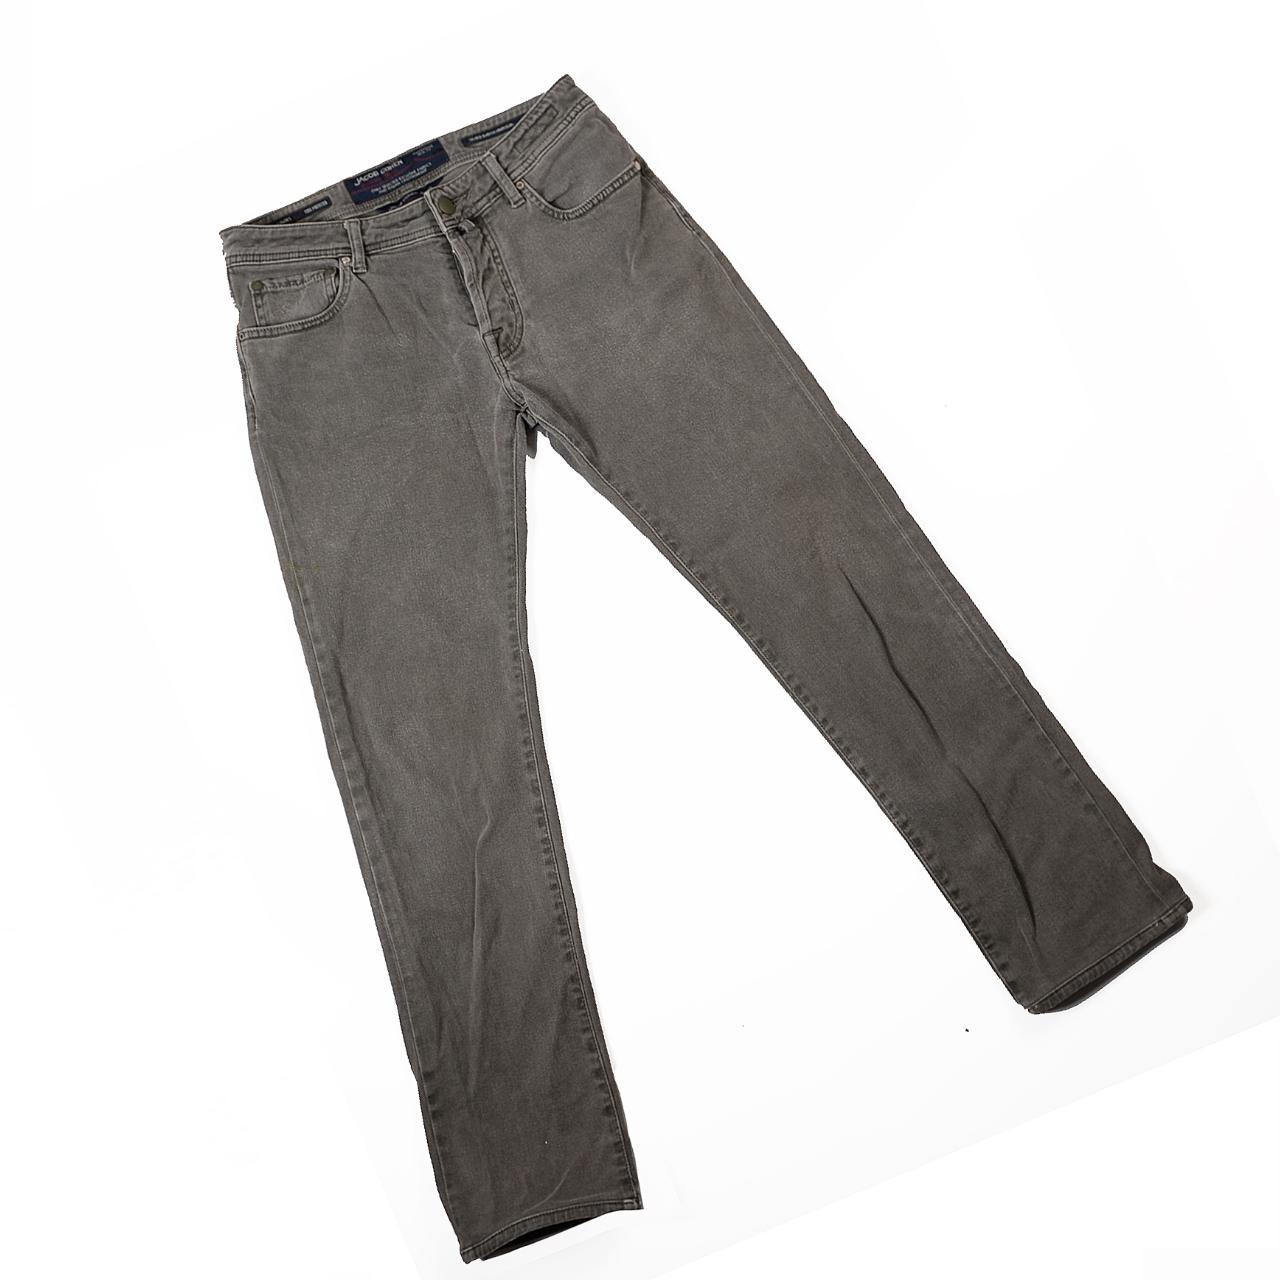 Product Image 1 - Jacob Cohen Tailored Jeans. Exclusively